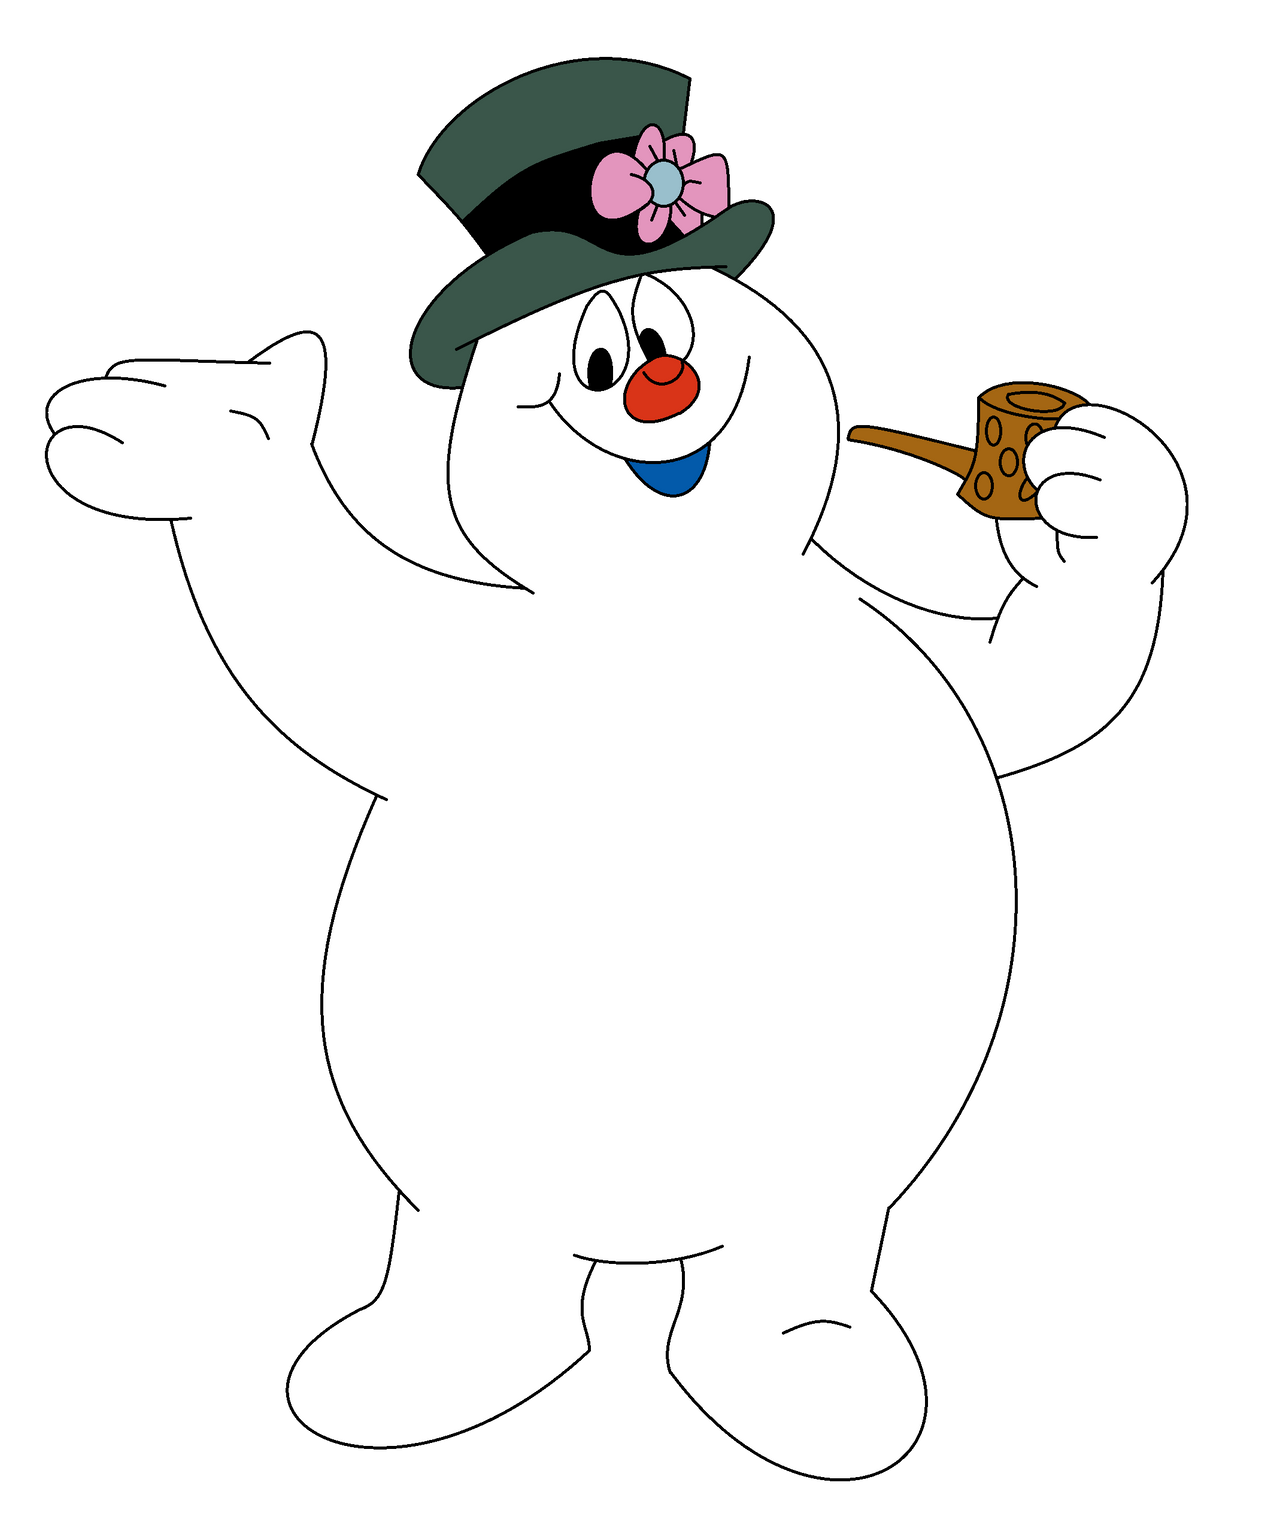 Frosty the Snowman by Fortnermations on DeviantArt